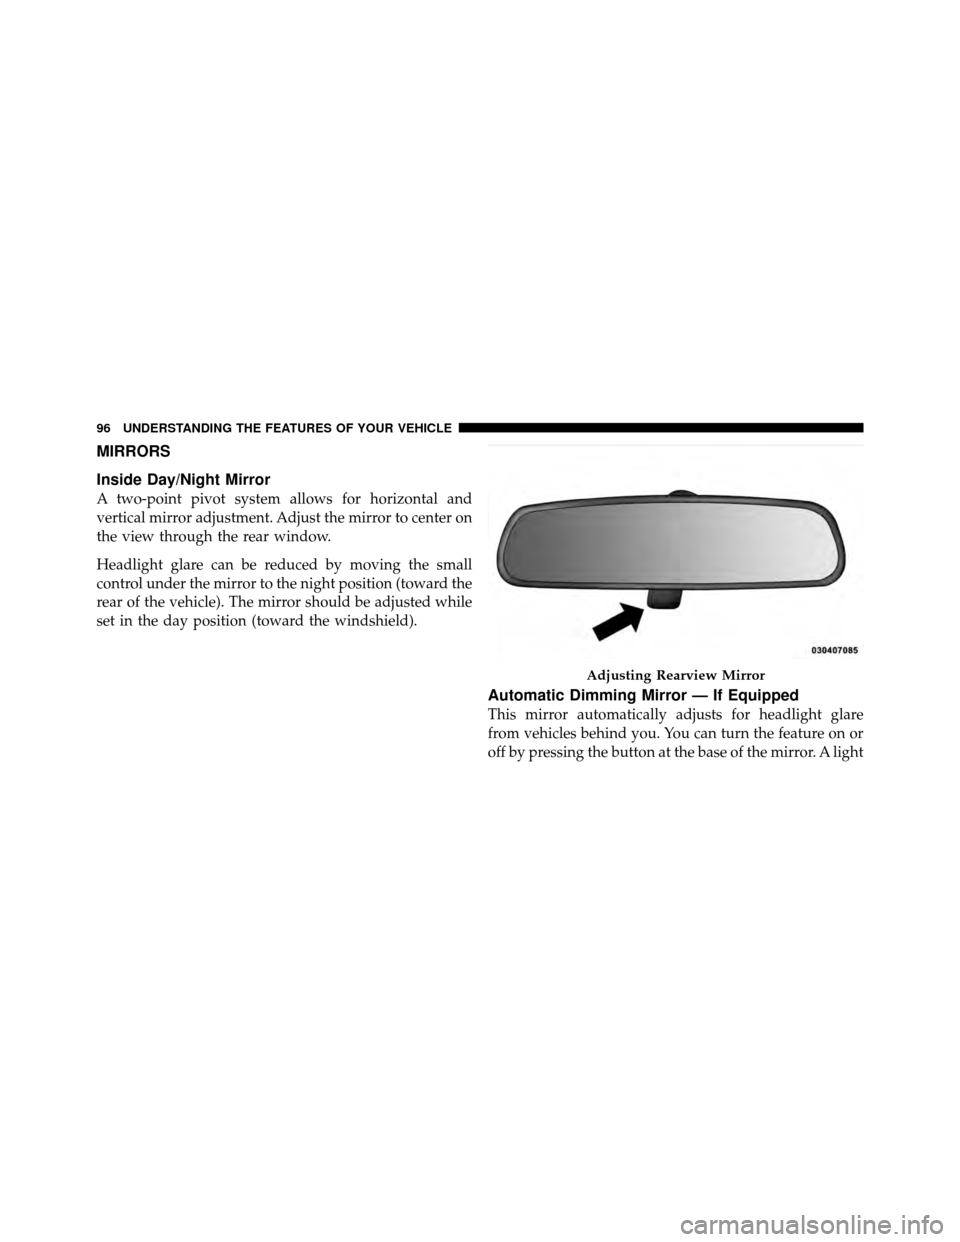 CHRYSLER 200 2012 1.G Owners Manual MIRRORS
Inside Day/Night Mirror
A two-point pivot system allows for horizontal and
vertical mirror adjustment. Adjust the mirror to center on
the view through the rear window.
Headlight glare can be r